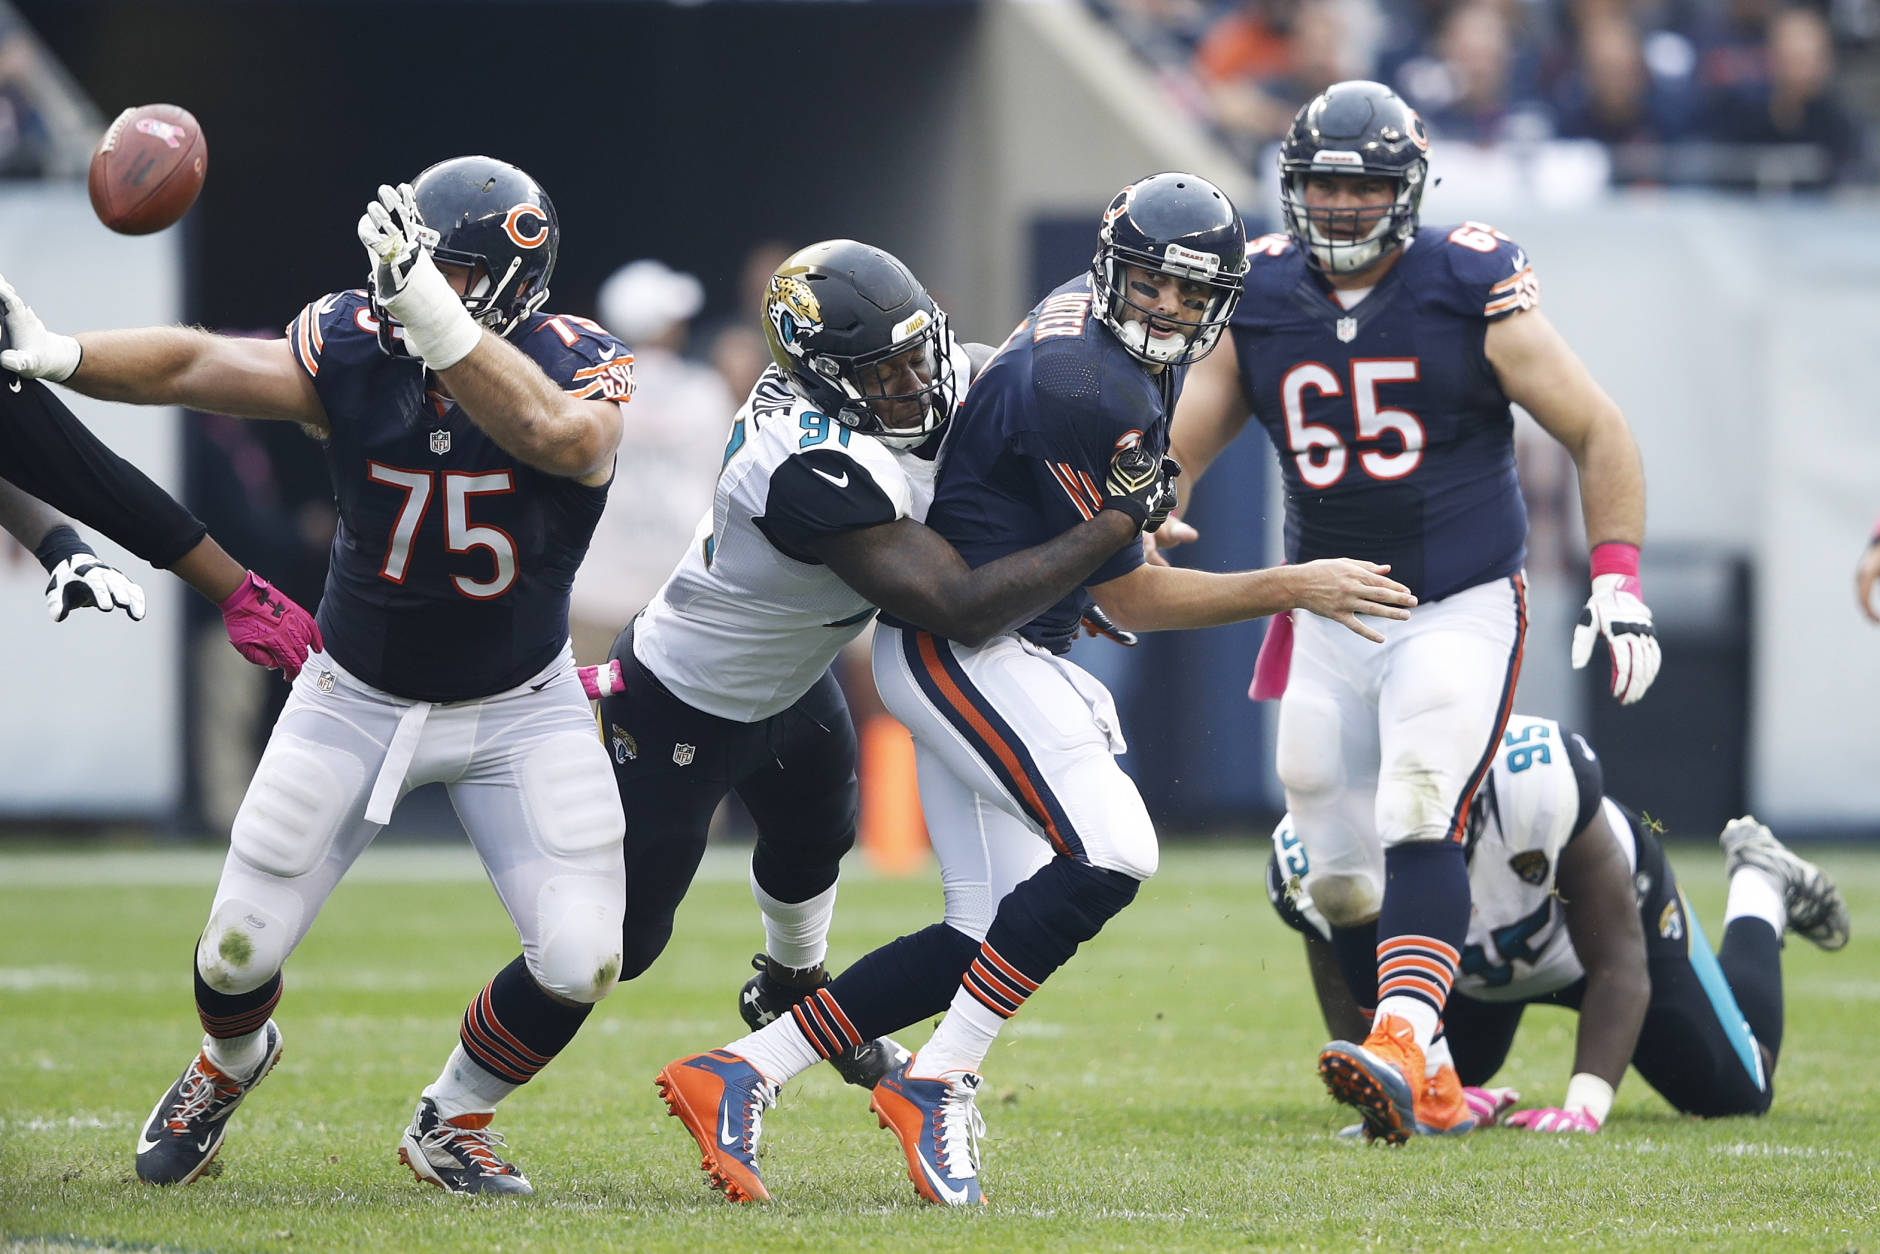 CHICAGO, IL - OCTOBER 16: Brian Hoyer #2 of the Chicago Bears loses the ball after being hit by Yannick Ngakoue #91 of the Jacksonville Jaguars in the second half of the game at Soldier Field on October 16, 2016 in Chicago, Illinois. The Jaguars defeated the Bears 17-16. (Photo by Joe Robbins/Getty Images)